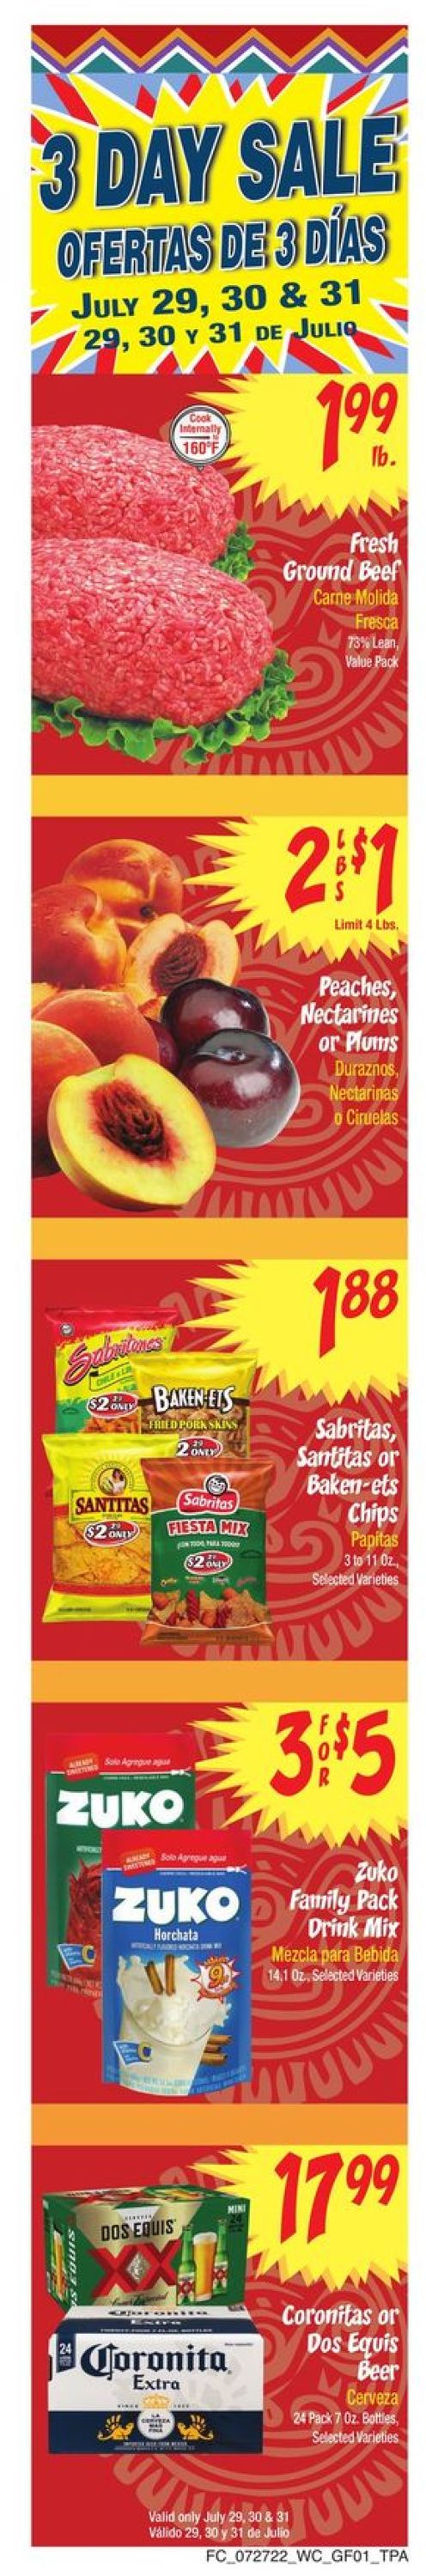 Food City Ad from 07/27/2022